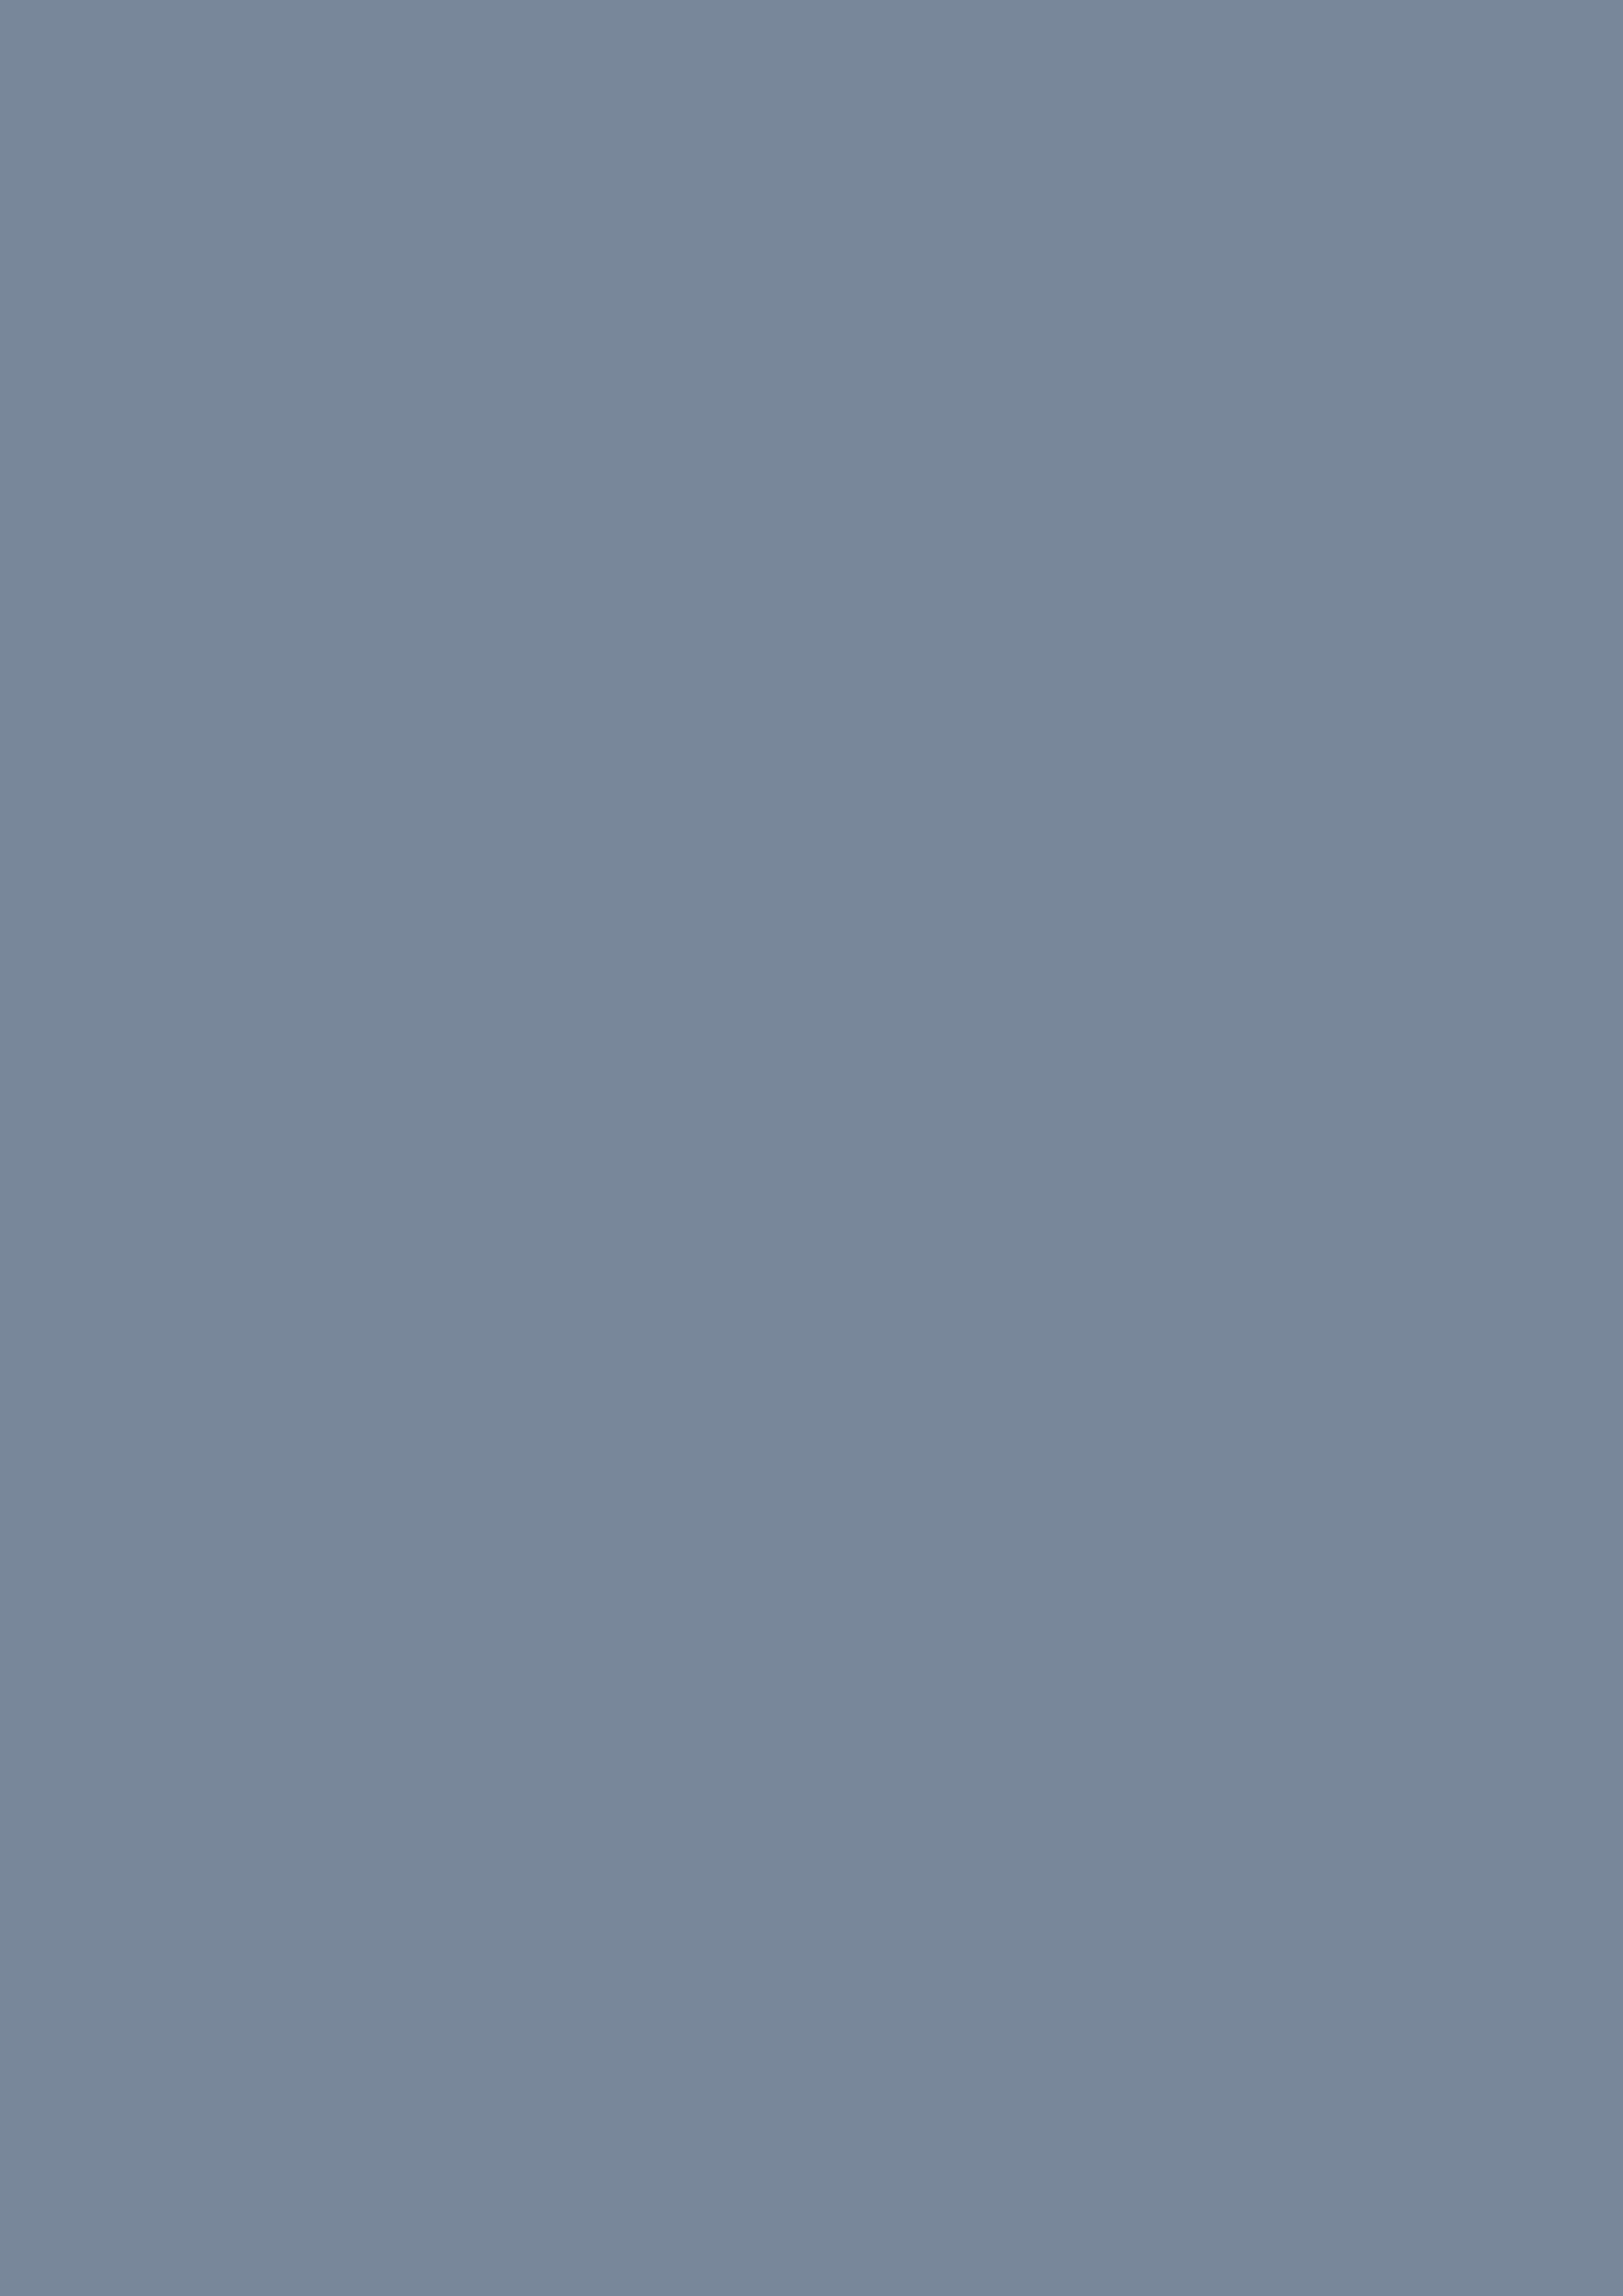 2480x3508 Light Slate Gray Solid Color Background